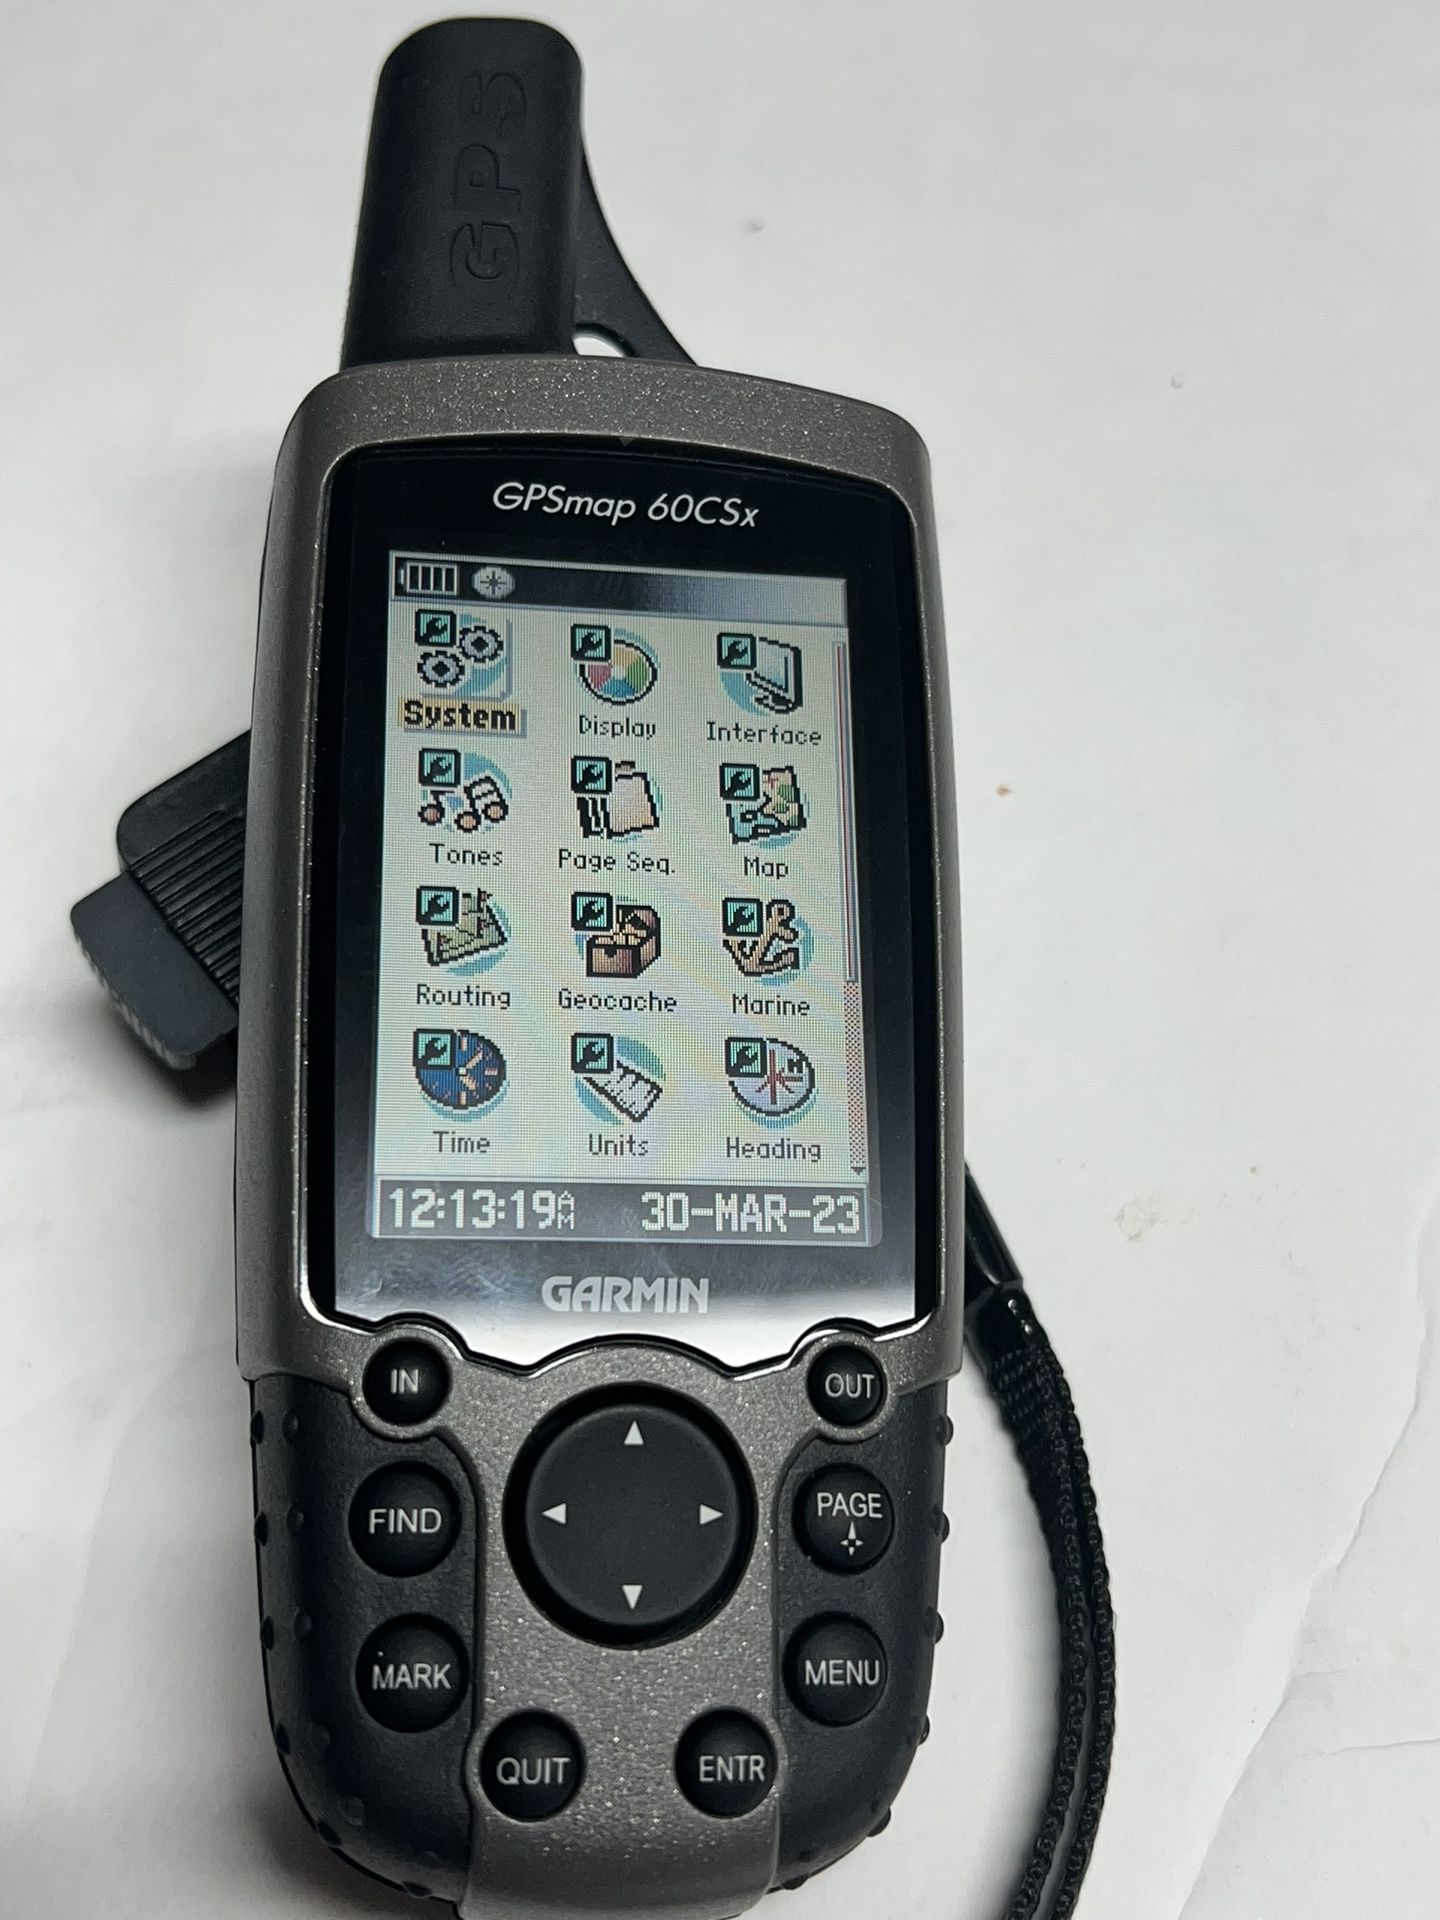 Garmin GPSMap 60csx Handheld GPS - Great Working Condition for Geocaching etc. Used in excellent cosmetic condition and fully functional. The unit wil